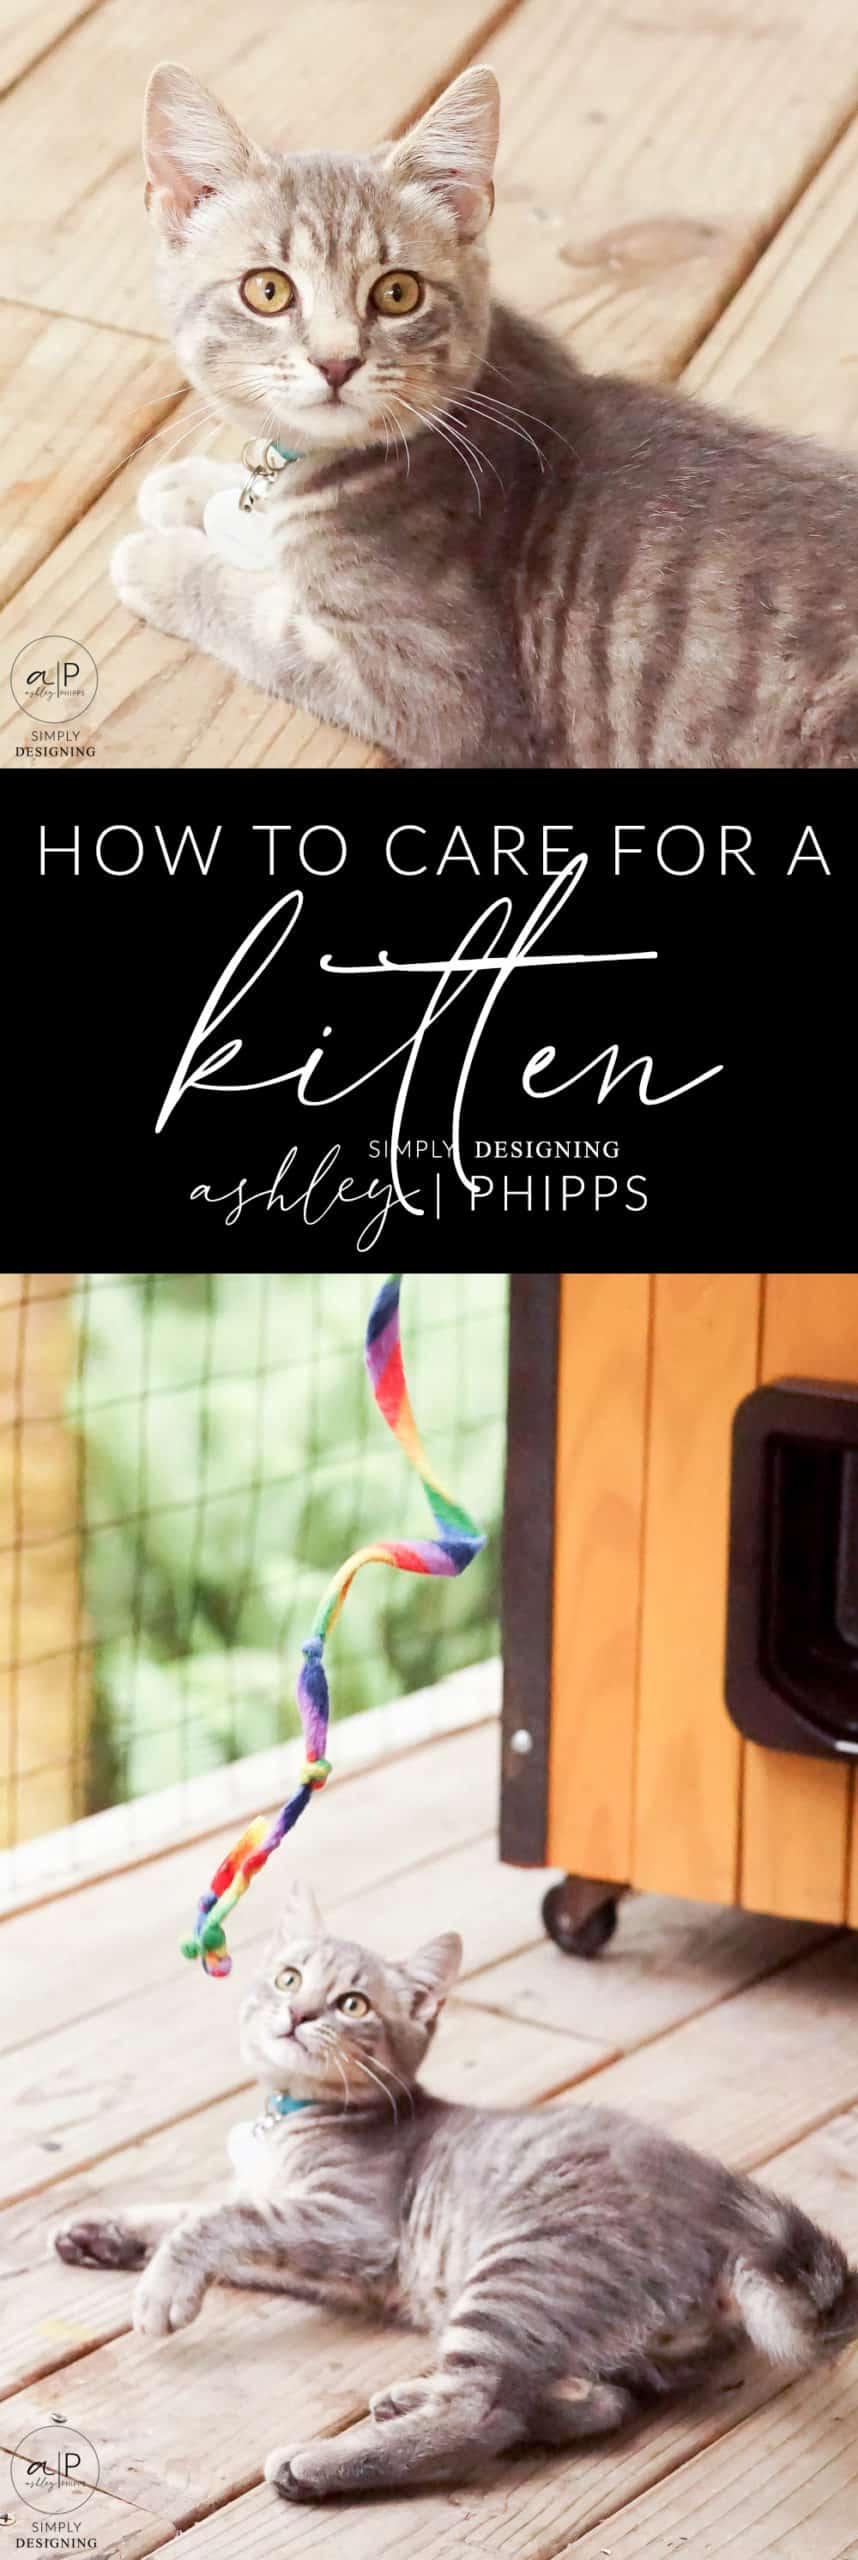 How to Care for a Kitten